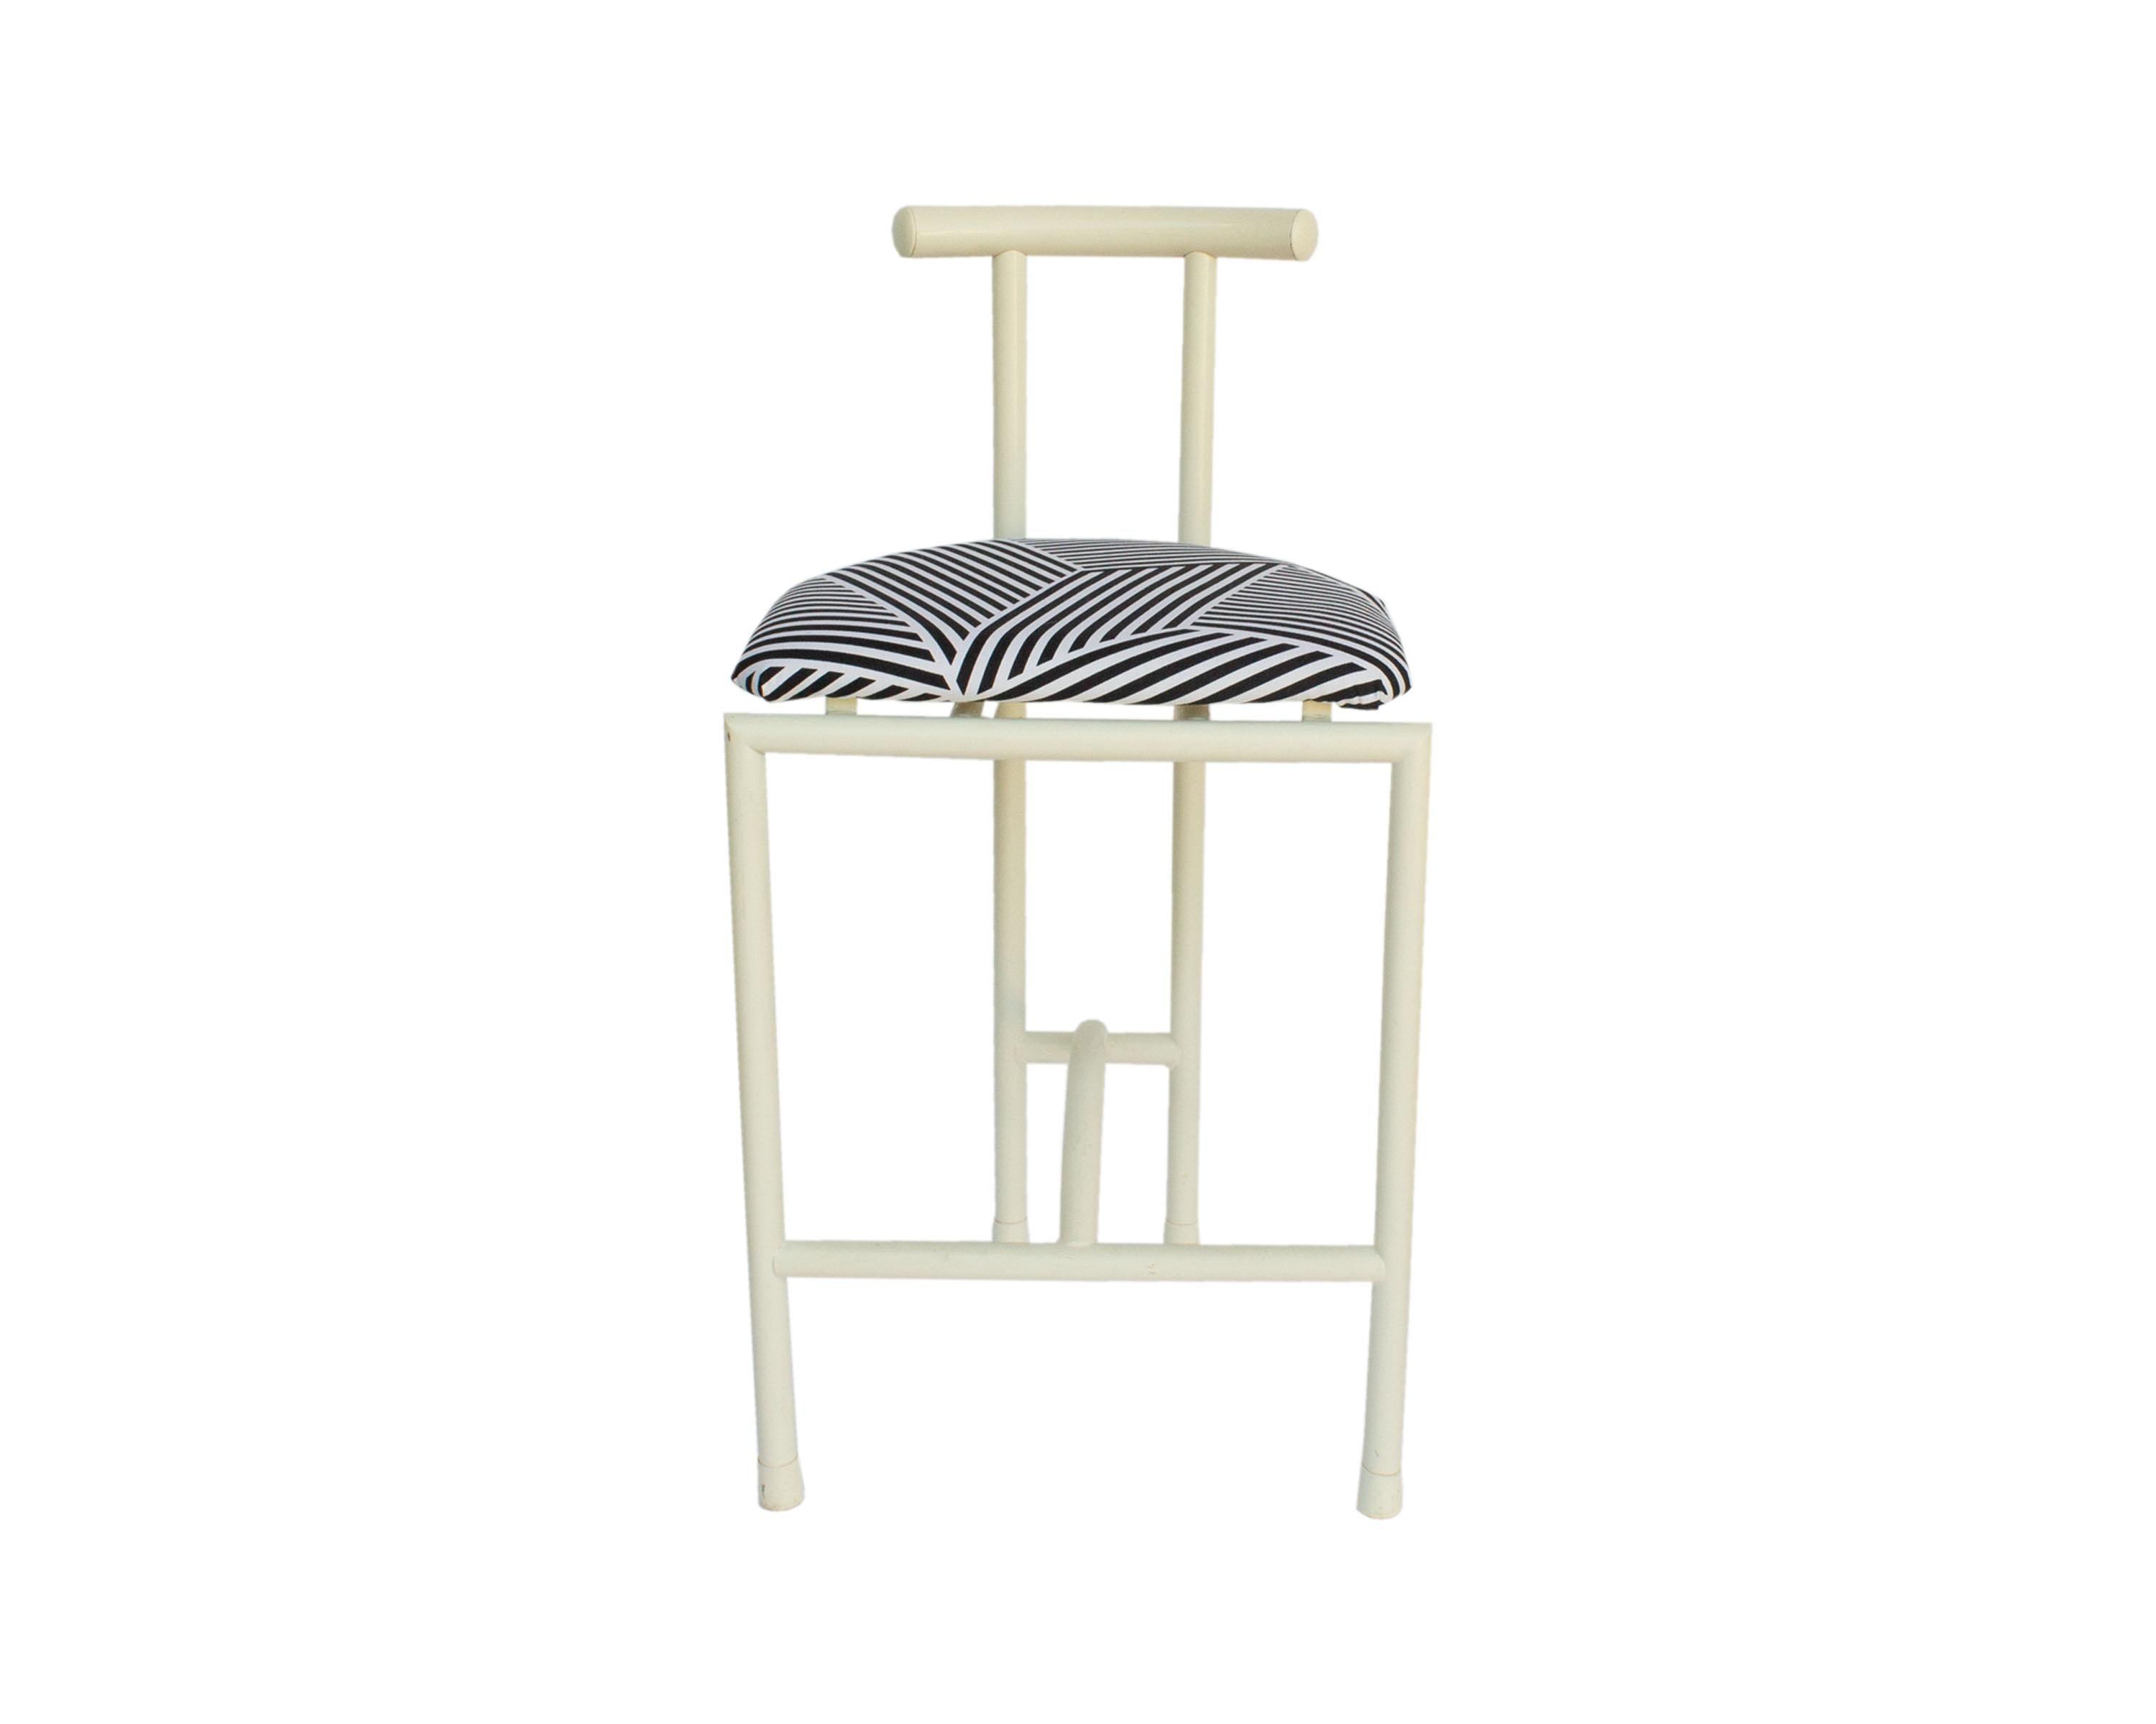 A set of four Postmodern Tokyo counter stools by Amisco. Made in 1989, the stools are made from a white tubular metal that create an overall sleek design. Black and white geometric fabric covers each of the seats. Several of the chairs have their